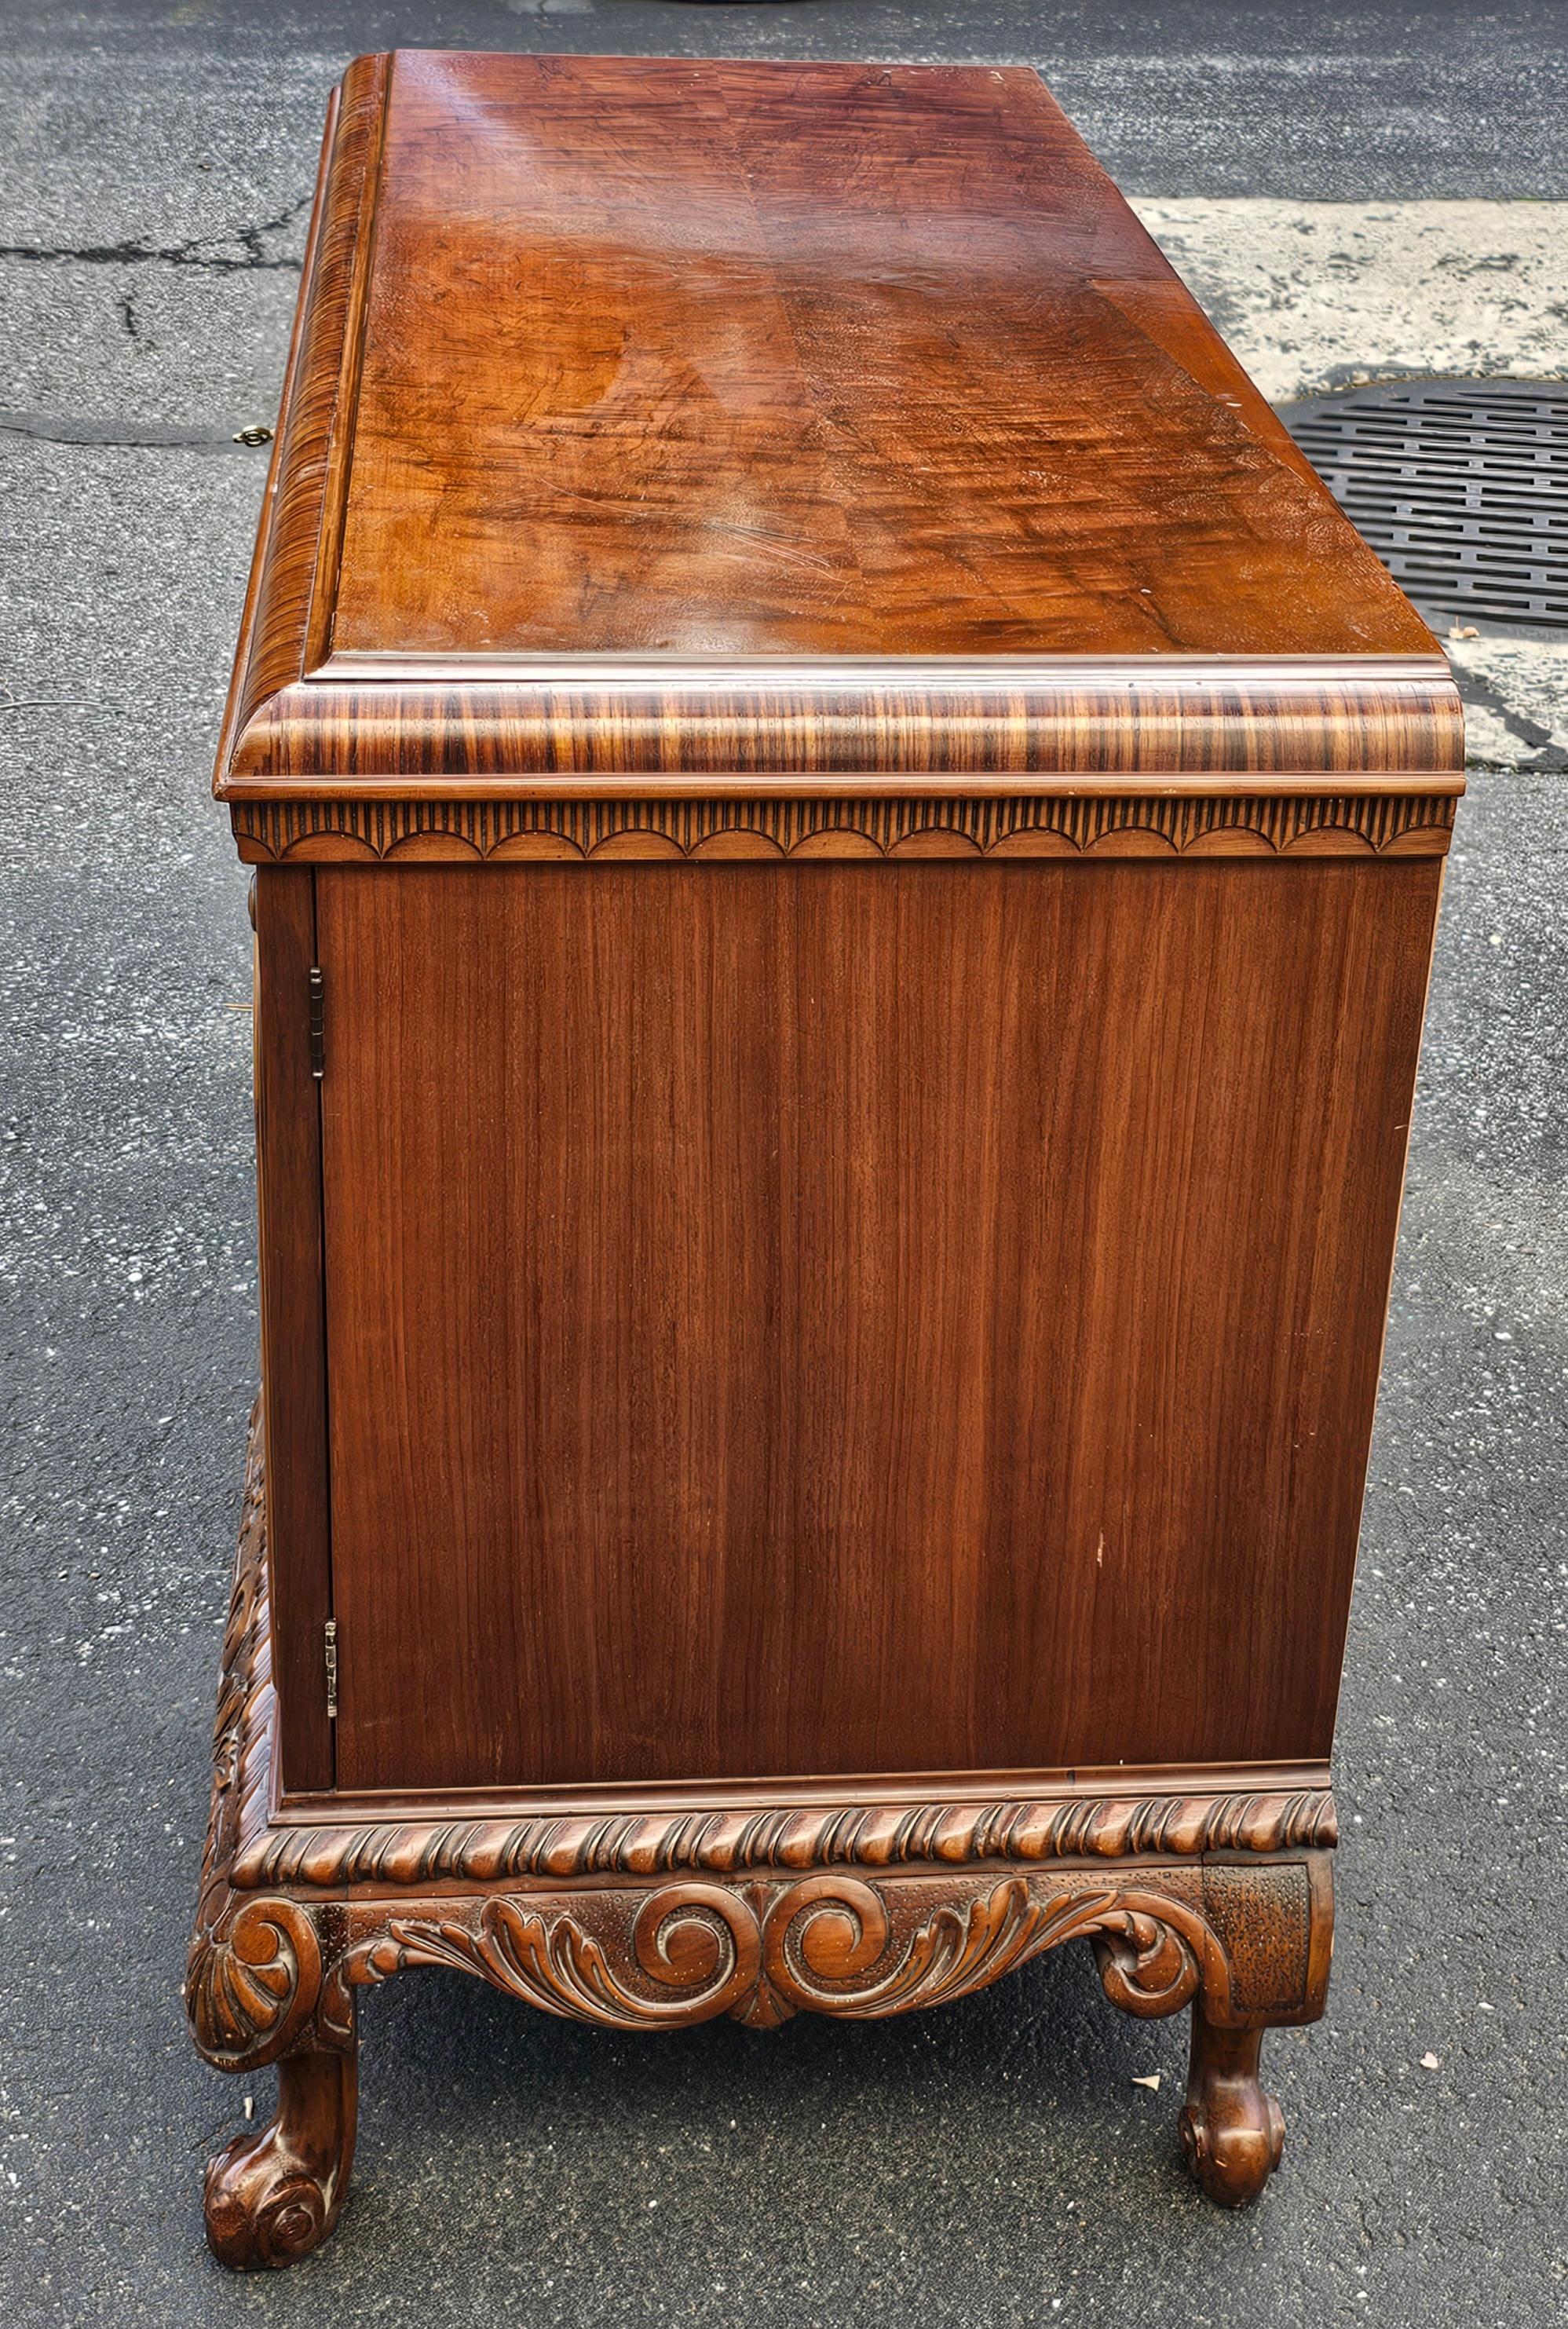 19th Century 19th C. Vernis Martin Chinoiserie Decorated Carved Mahogany Side Cabinet Buffet For Sale